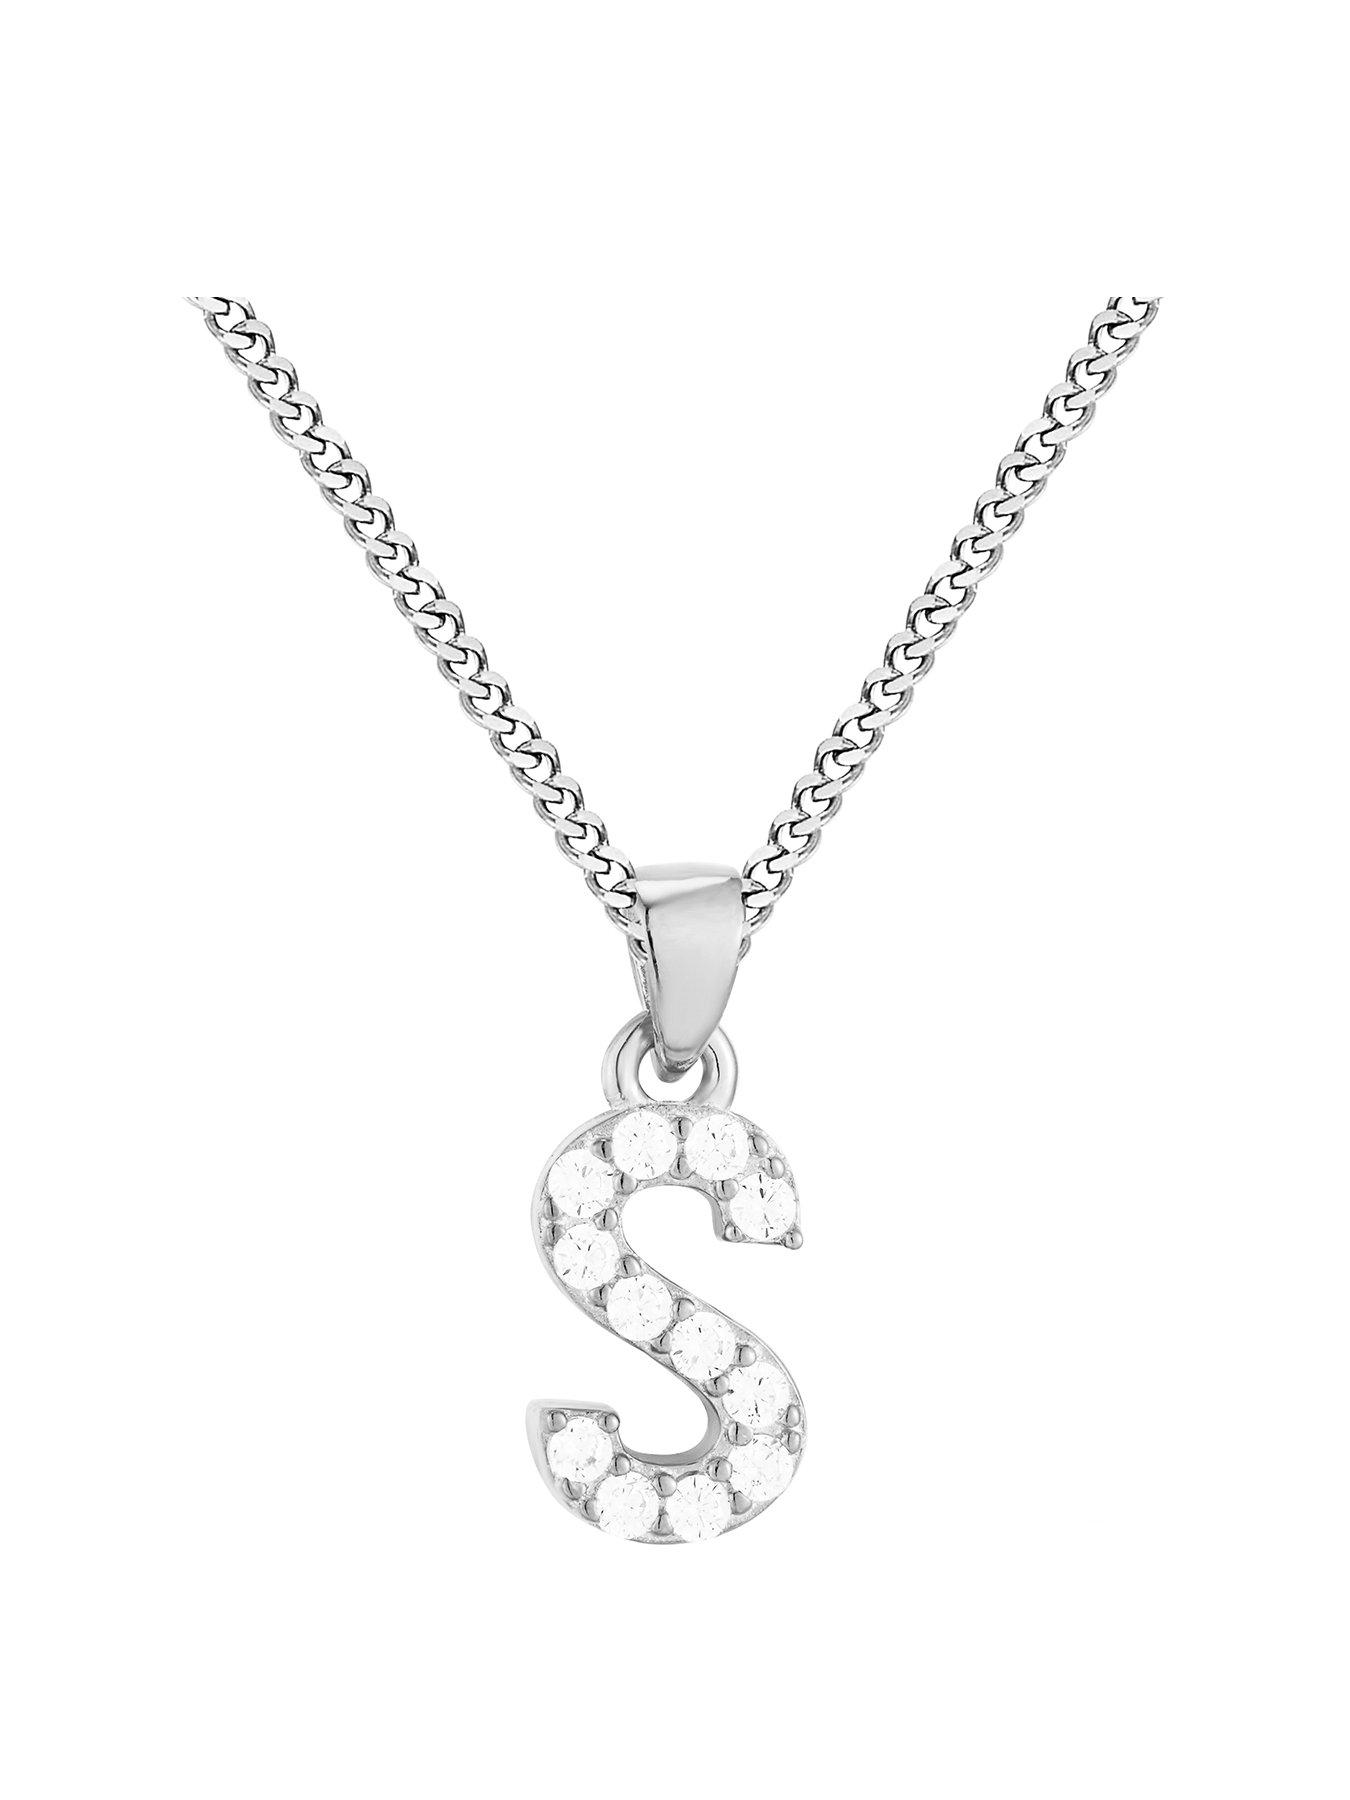 Details about  / Sterling Silver CZ Chain Necklace Slide MSRP $60